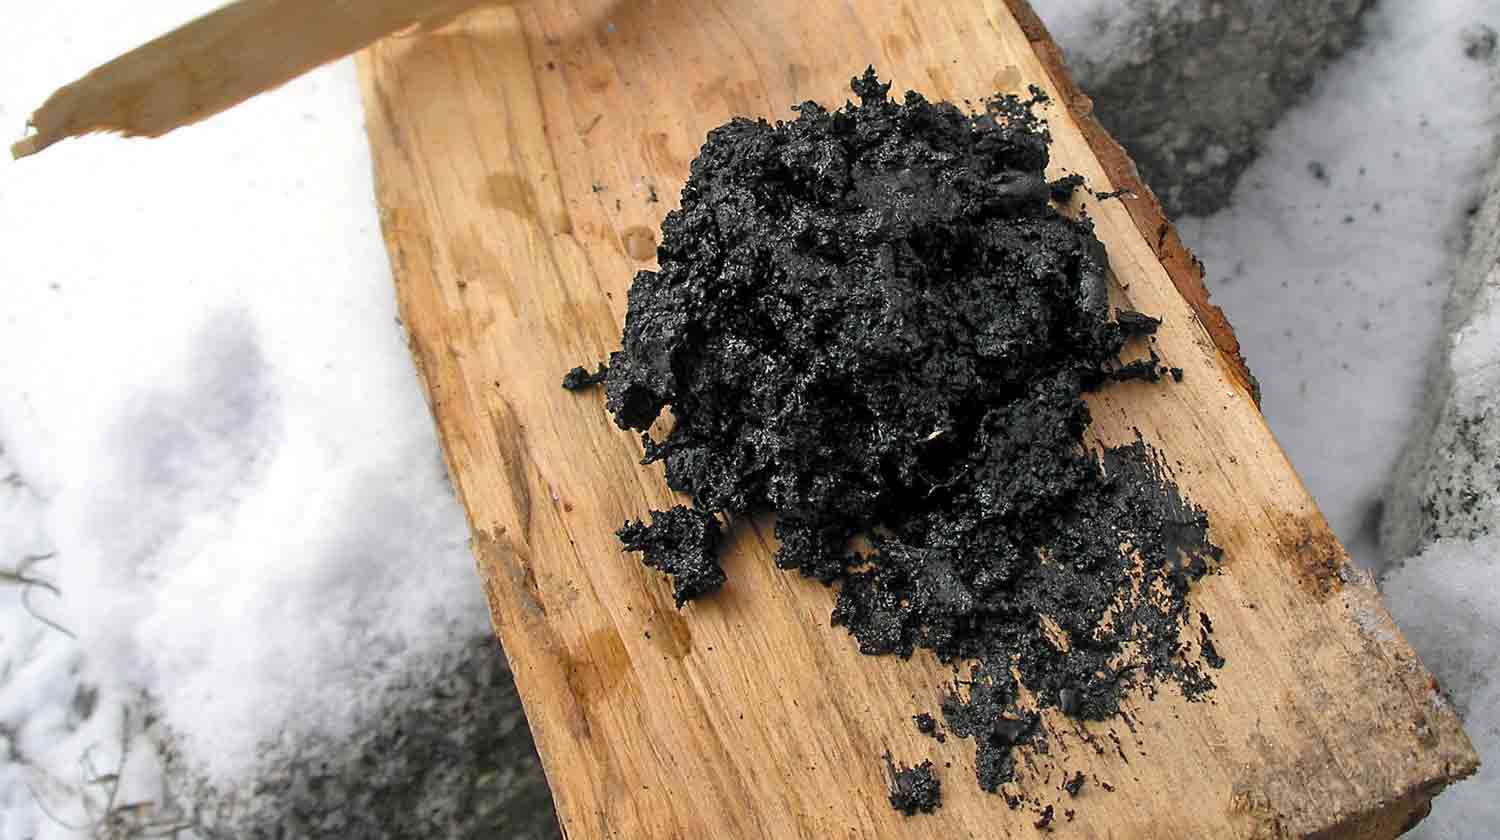 A pile of birch tar pitch atop a piece of wood in a snowy area.